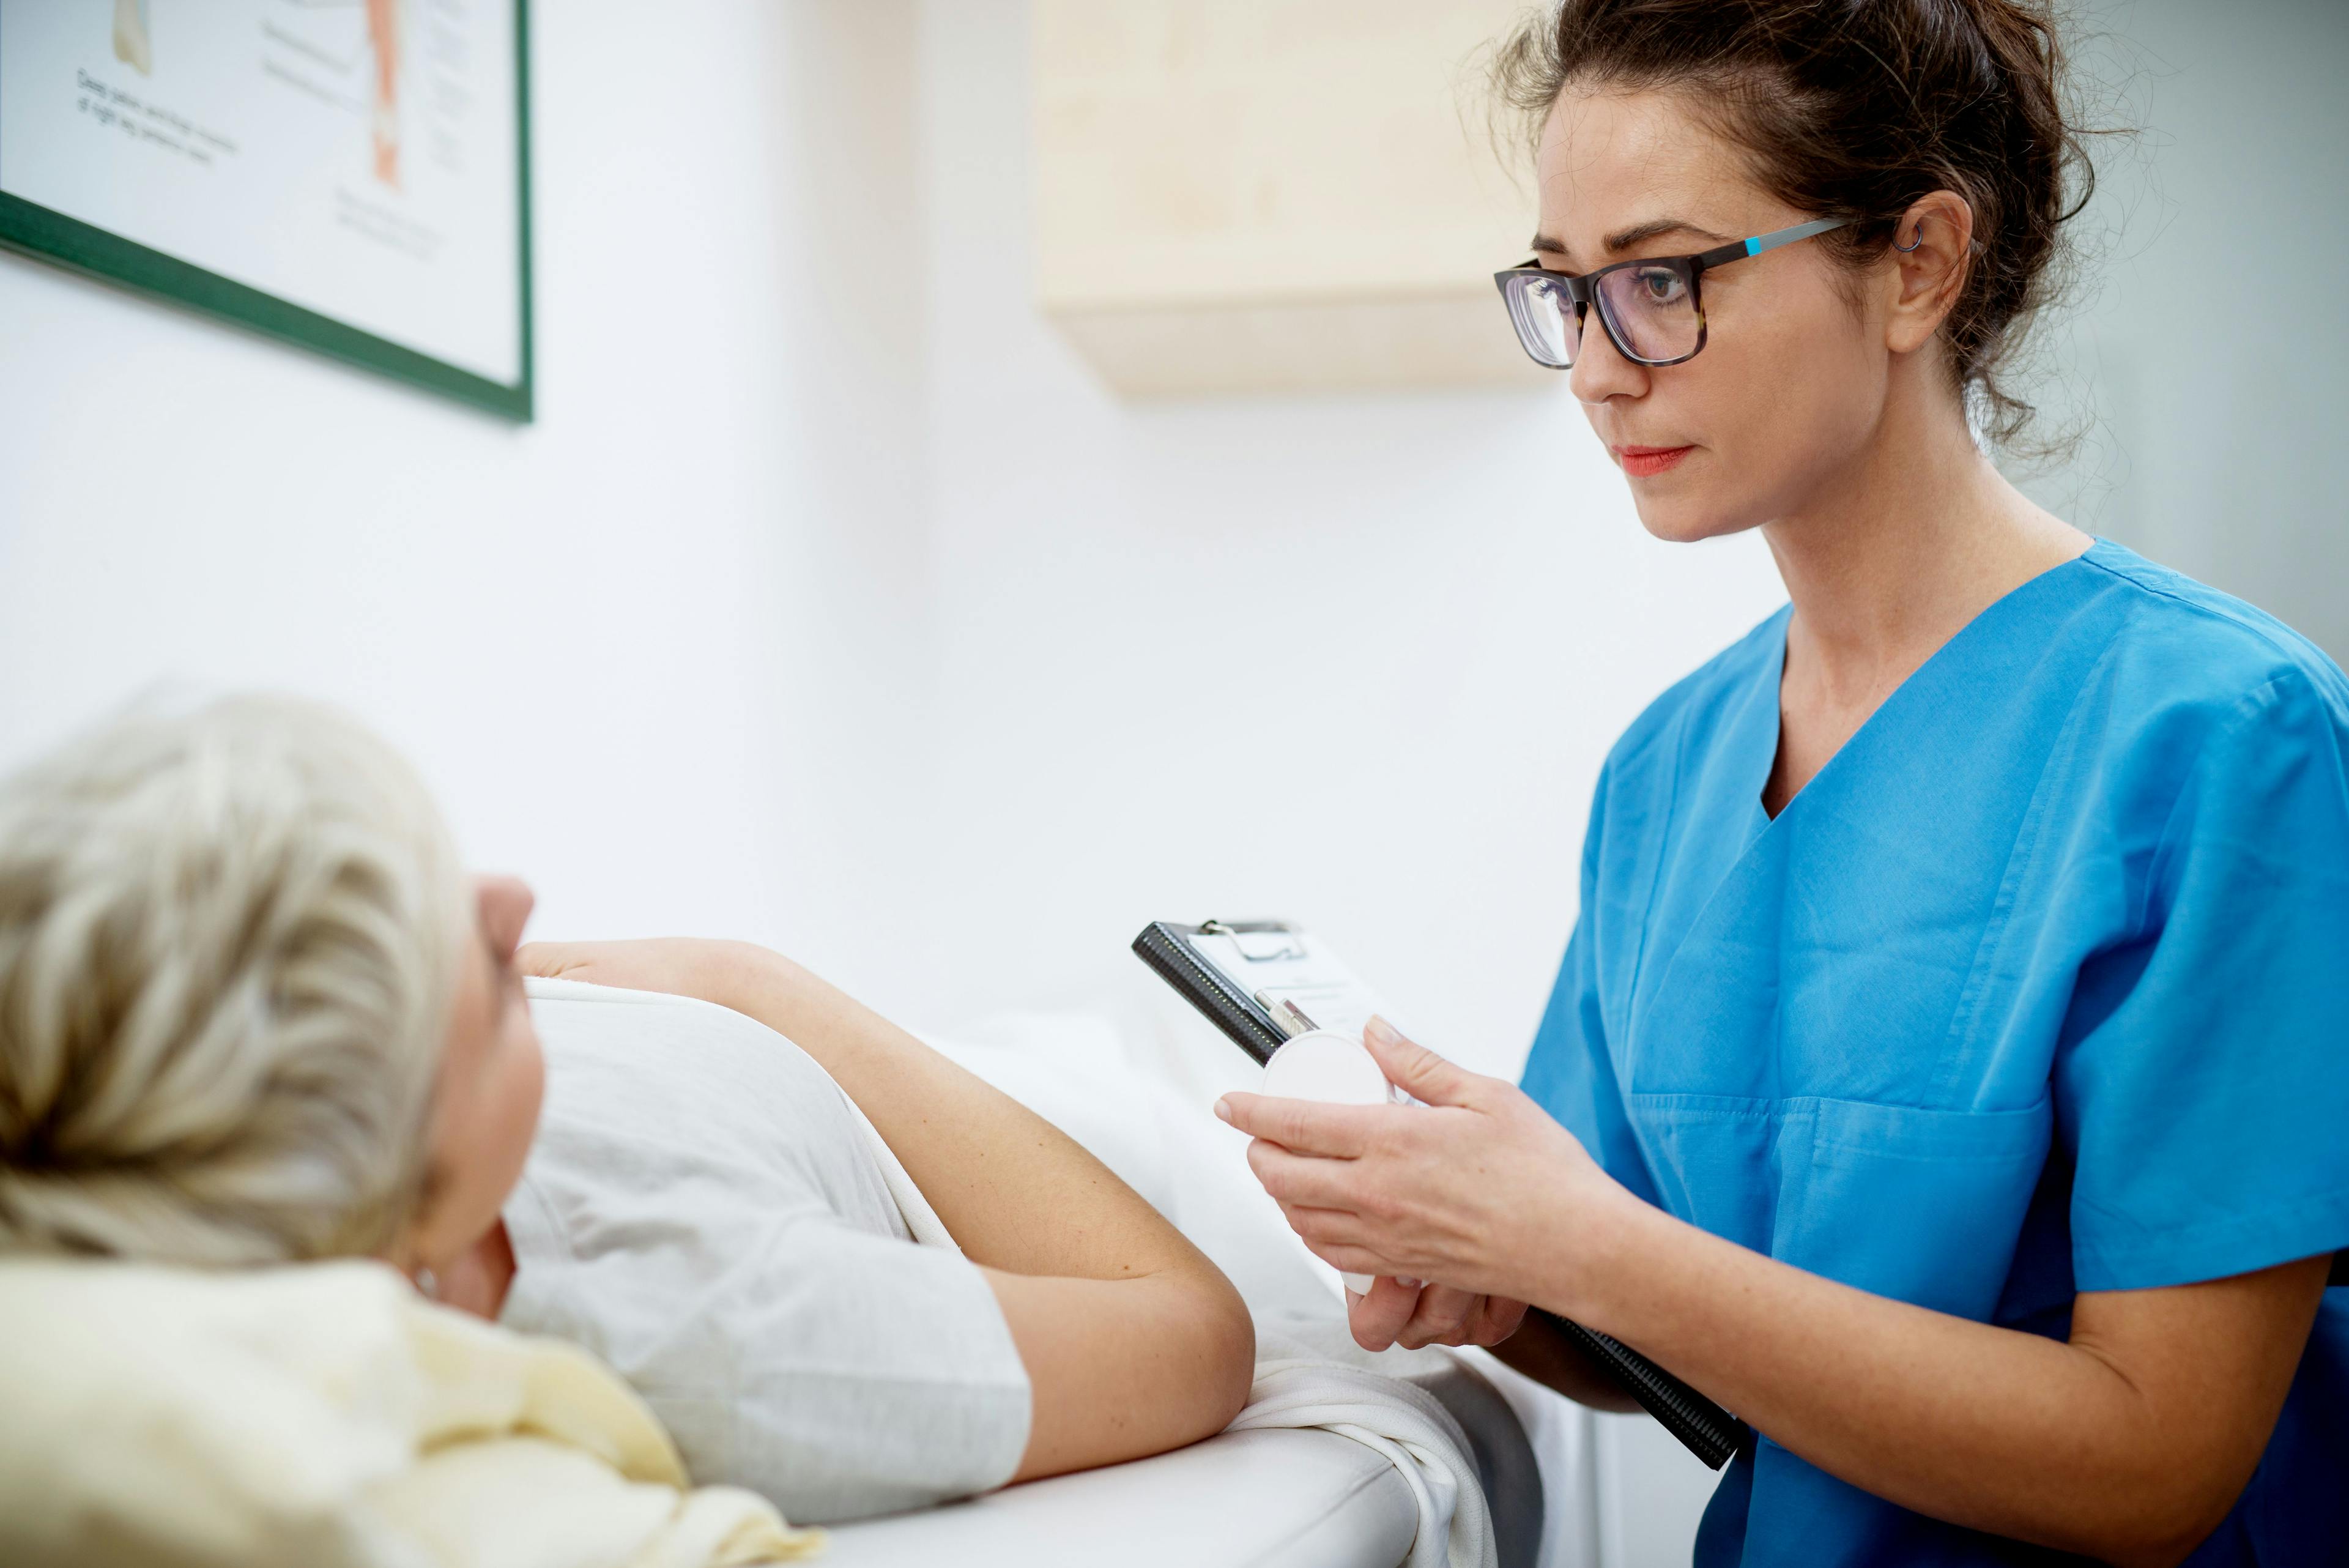 How healthcare systems can work to keep nurses